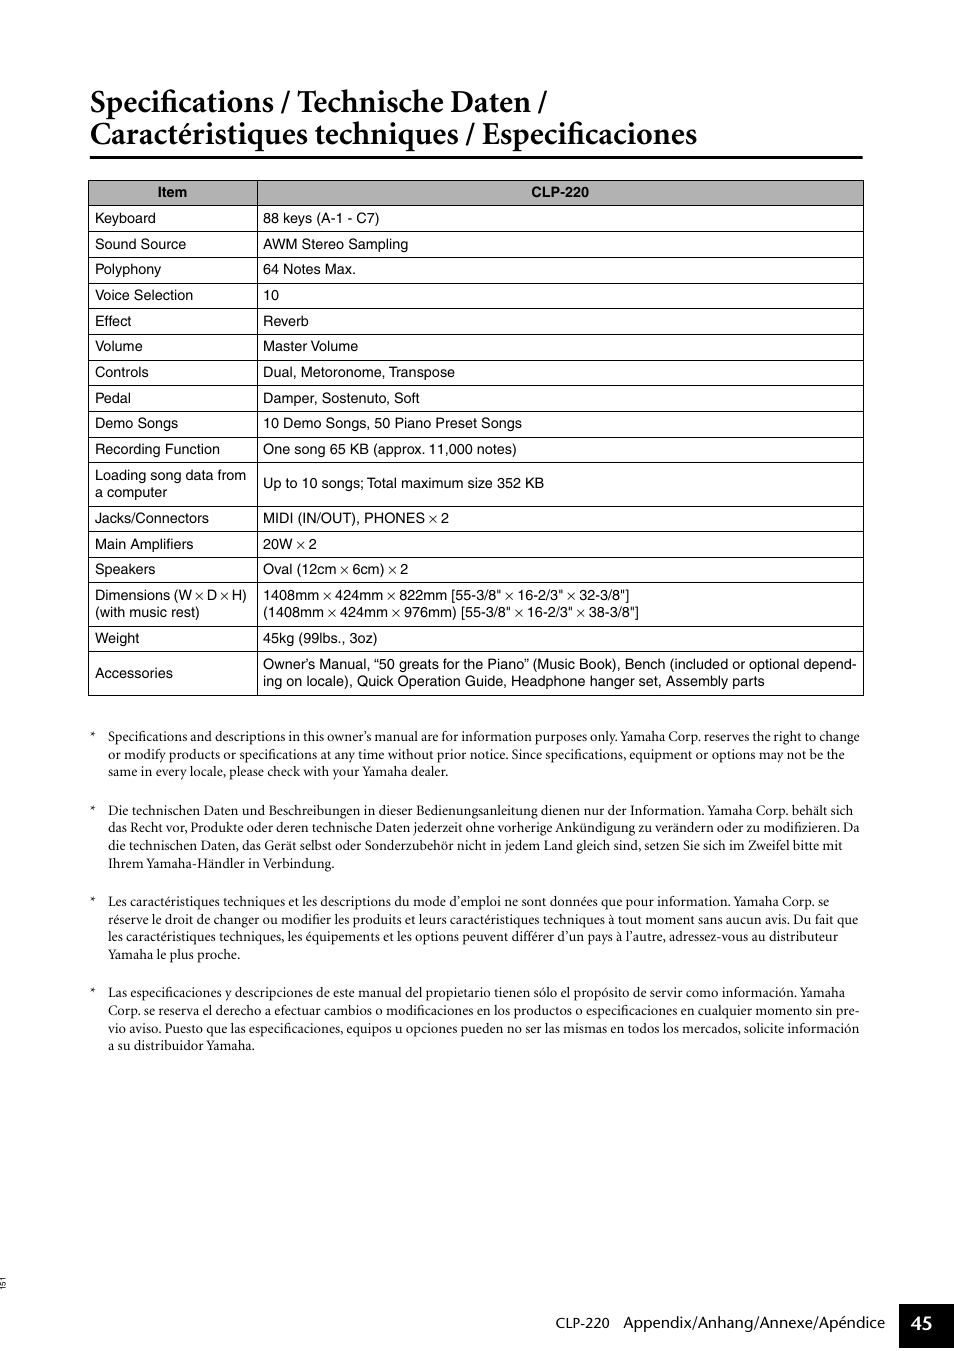 Specifications | Yamaha CLP-220 User Manual | Page 45 / 50